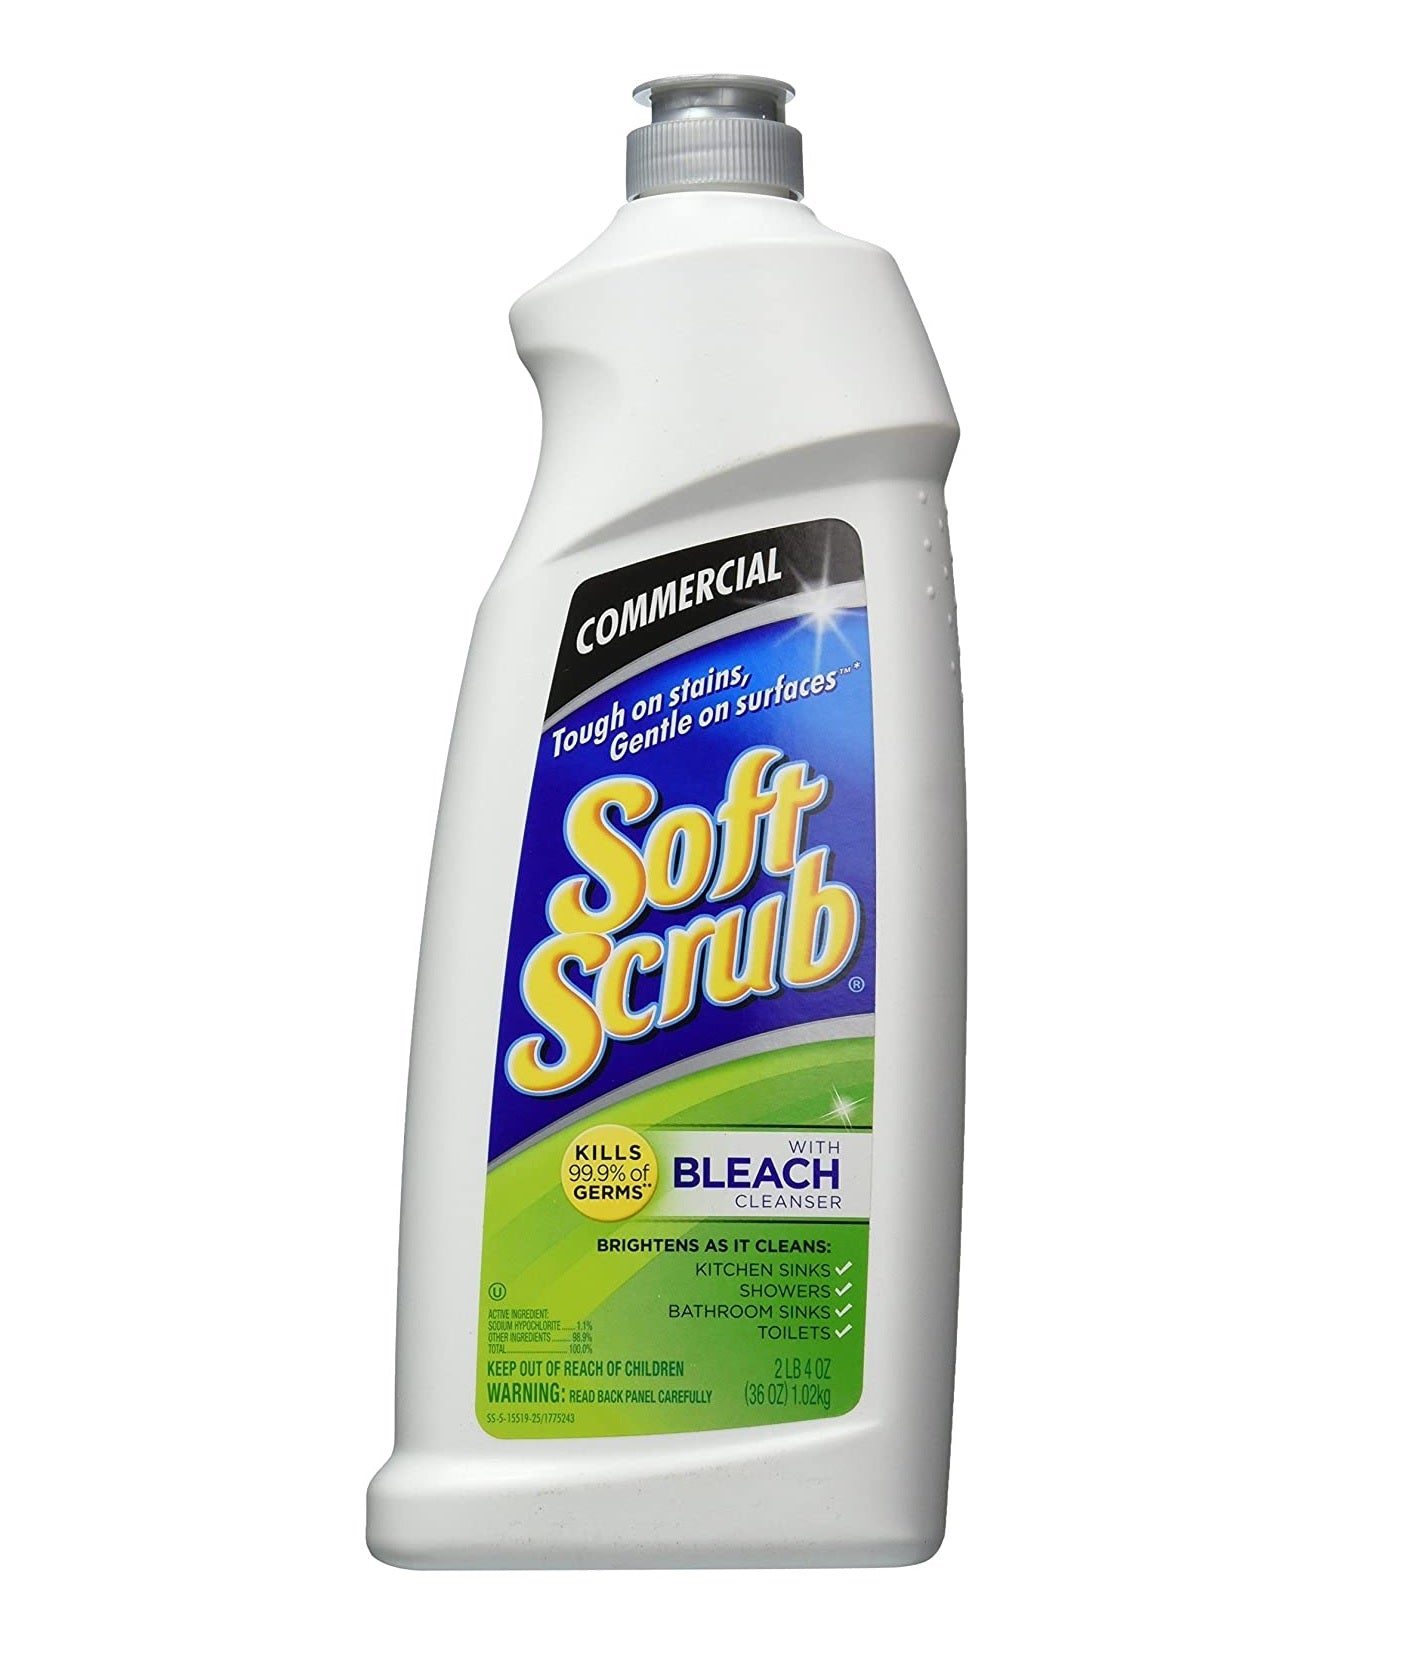 Soft Scrub Commercial Cleanser with Bleach - 36oz/6pk